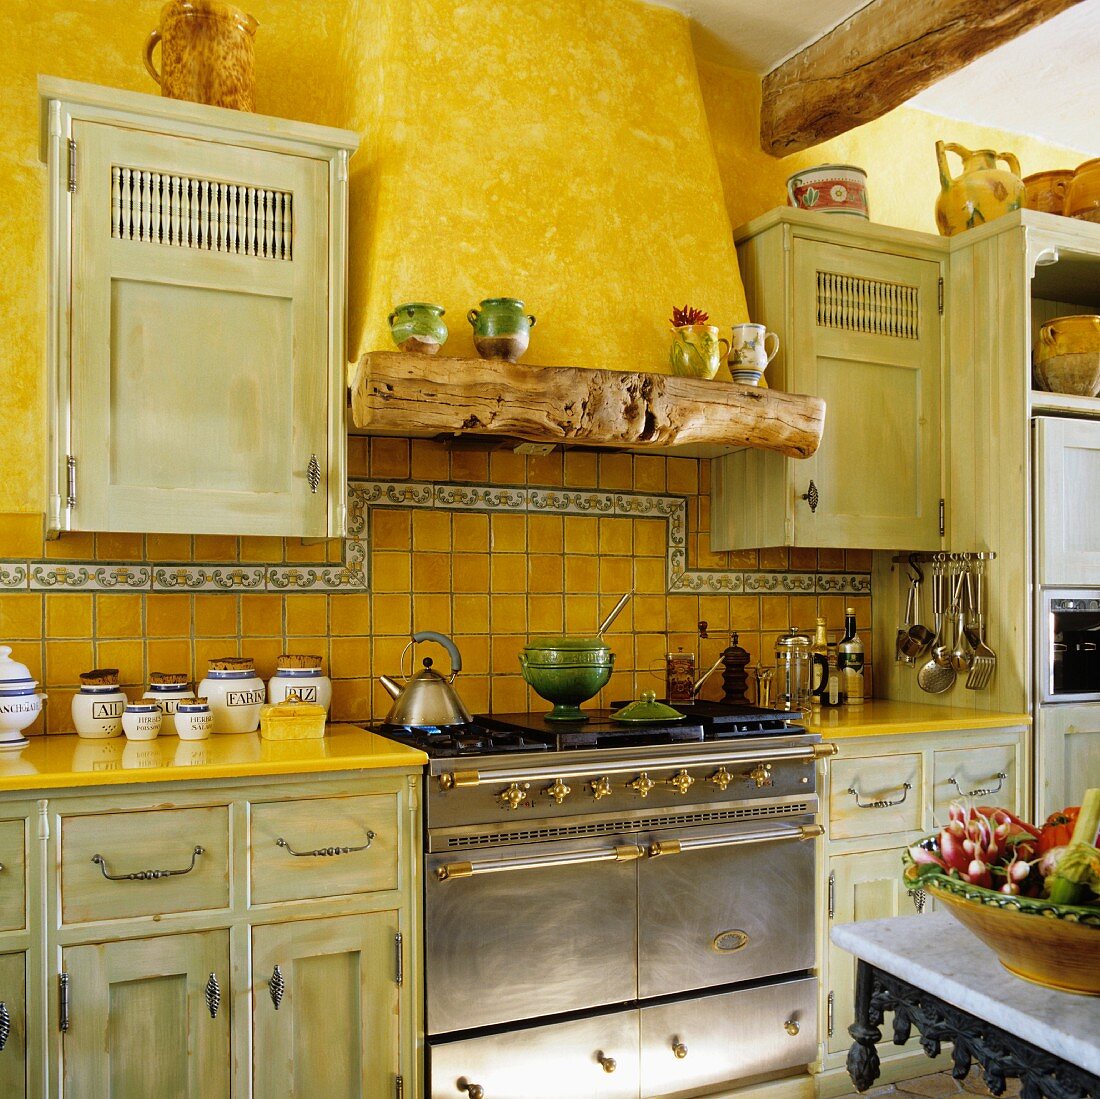 An old kitchen in a country house with canary yellow walls and an antique stainless steel cooker with a built-in extractor fan